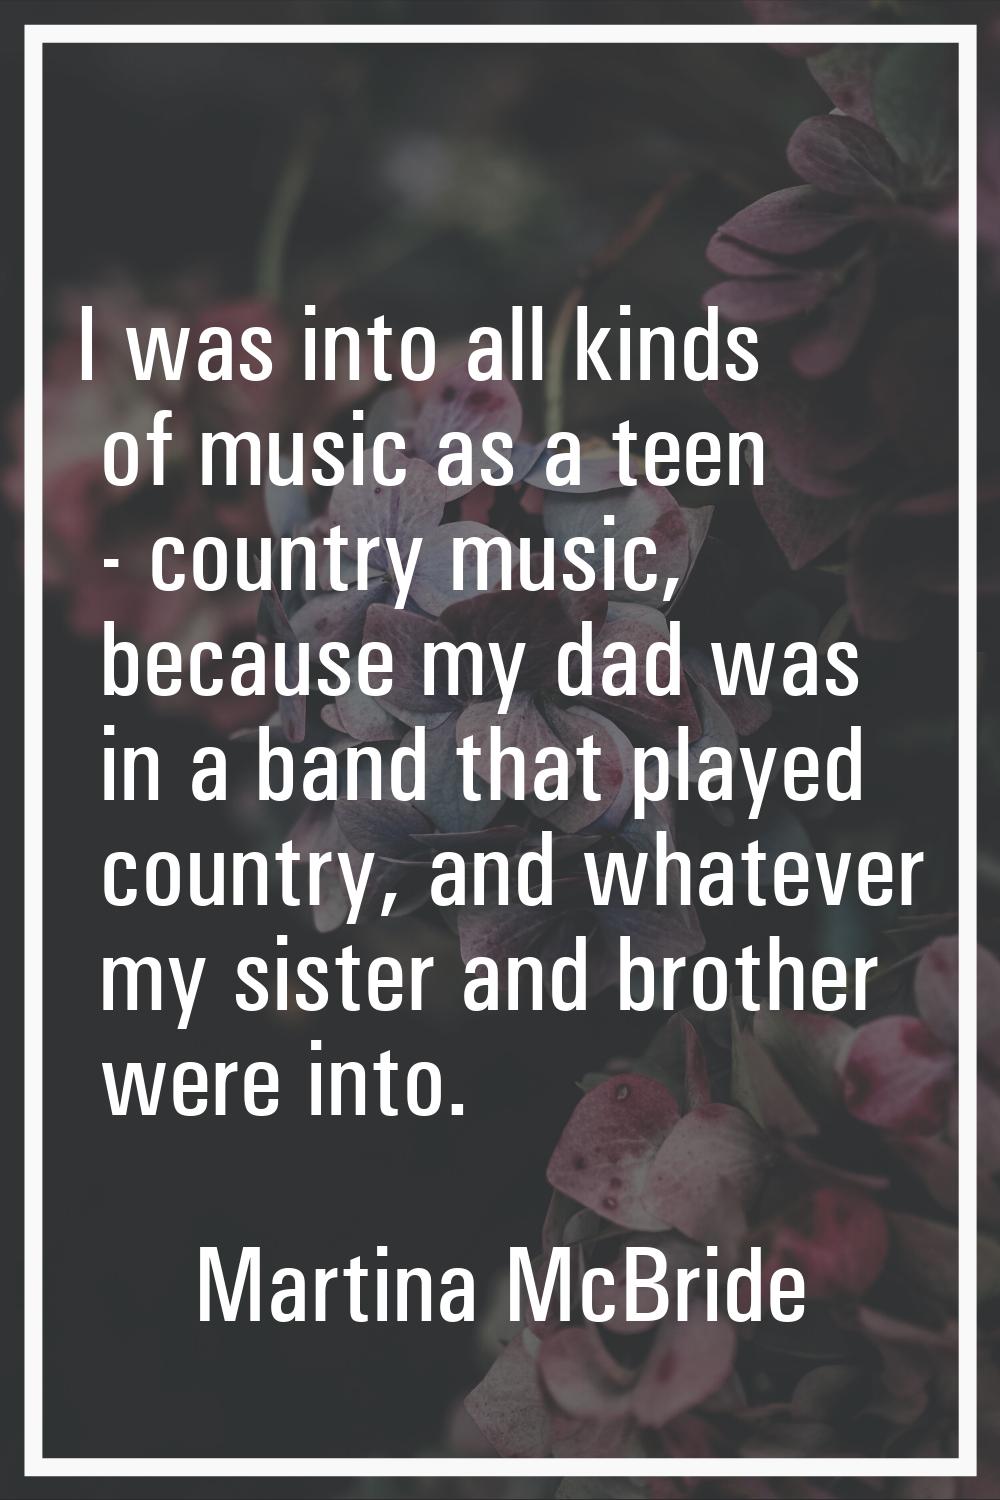 I was into all kinds of music as a teen - country music, because my dad was in a band that played c